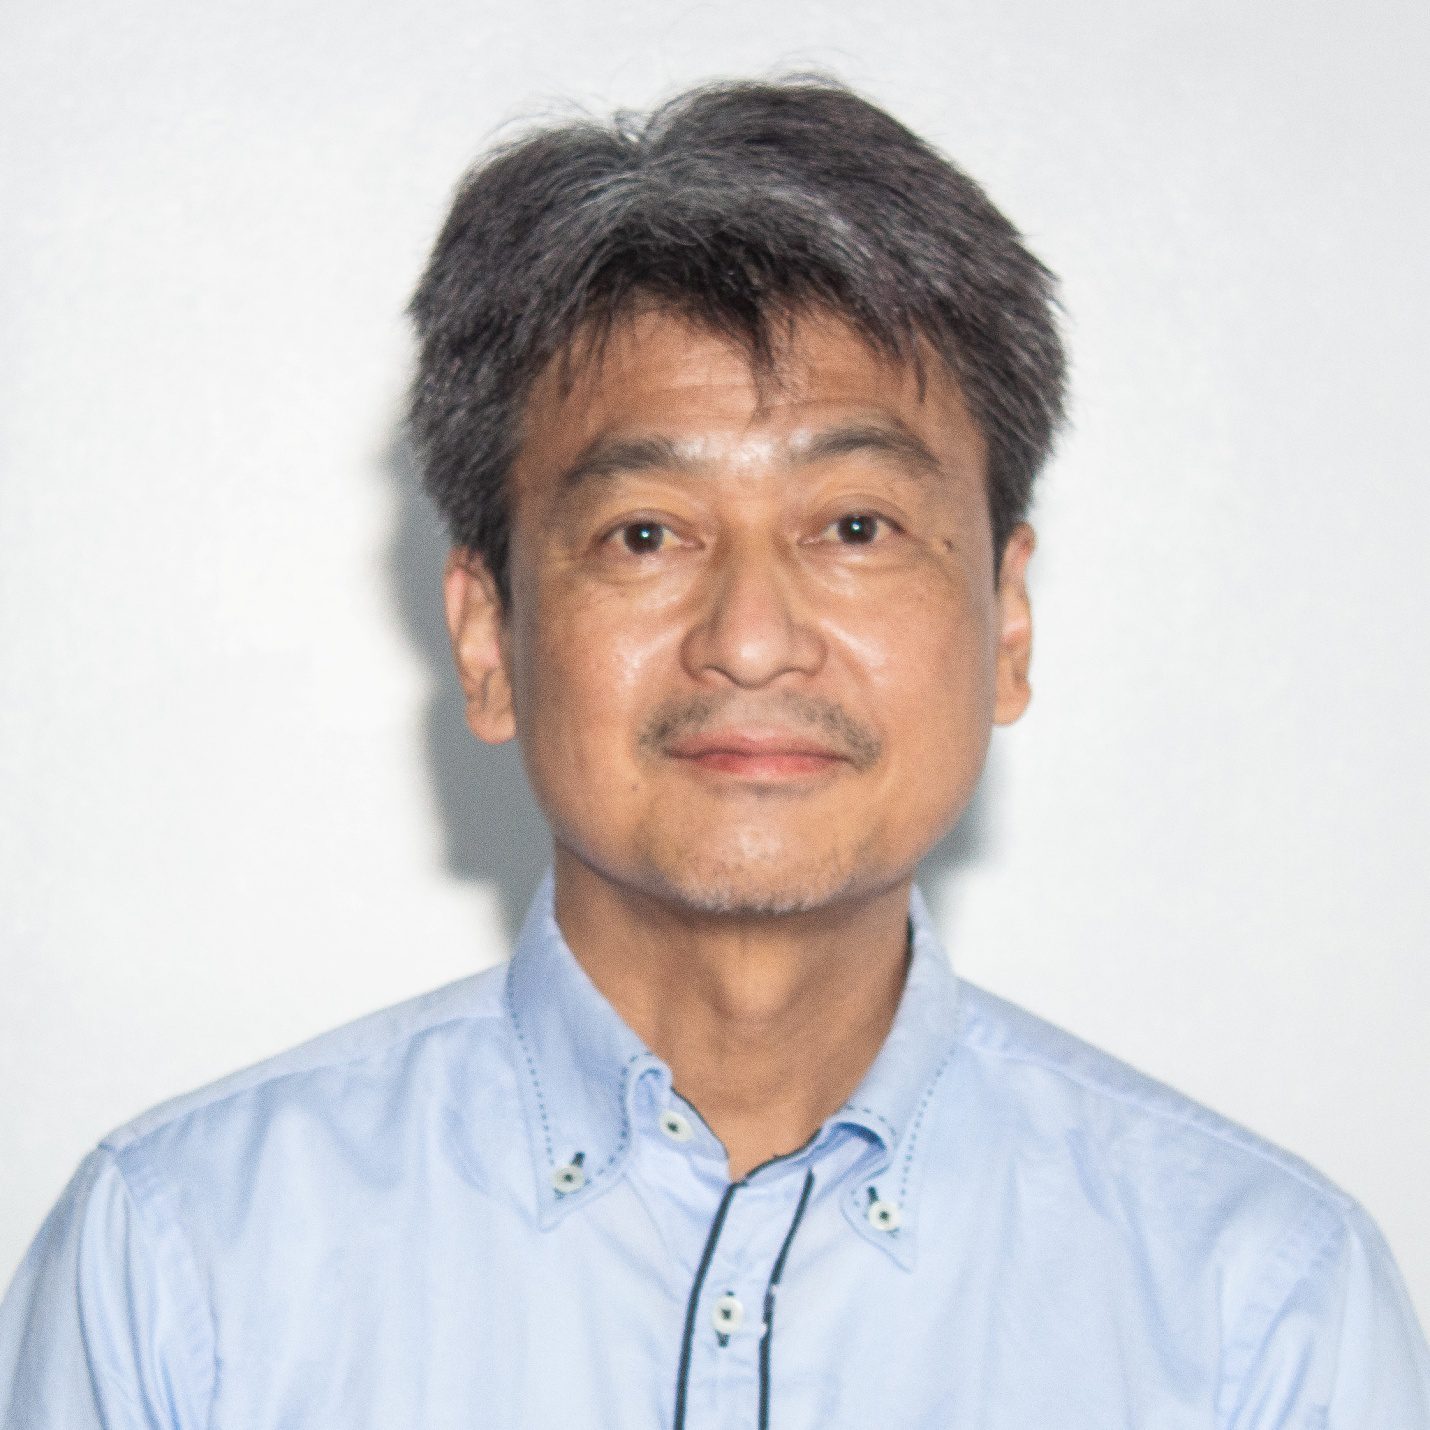 C:\Users\GCPI-ROBBY\Desktop\PRS\PR 1\Ted Aikawa - Director & General Manager.jpg